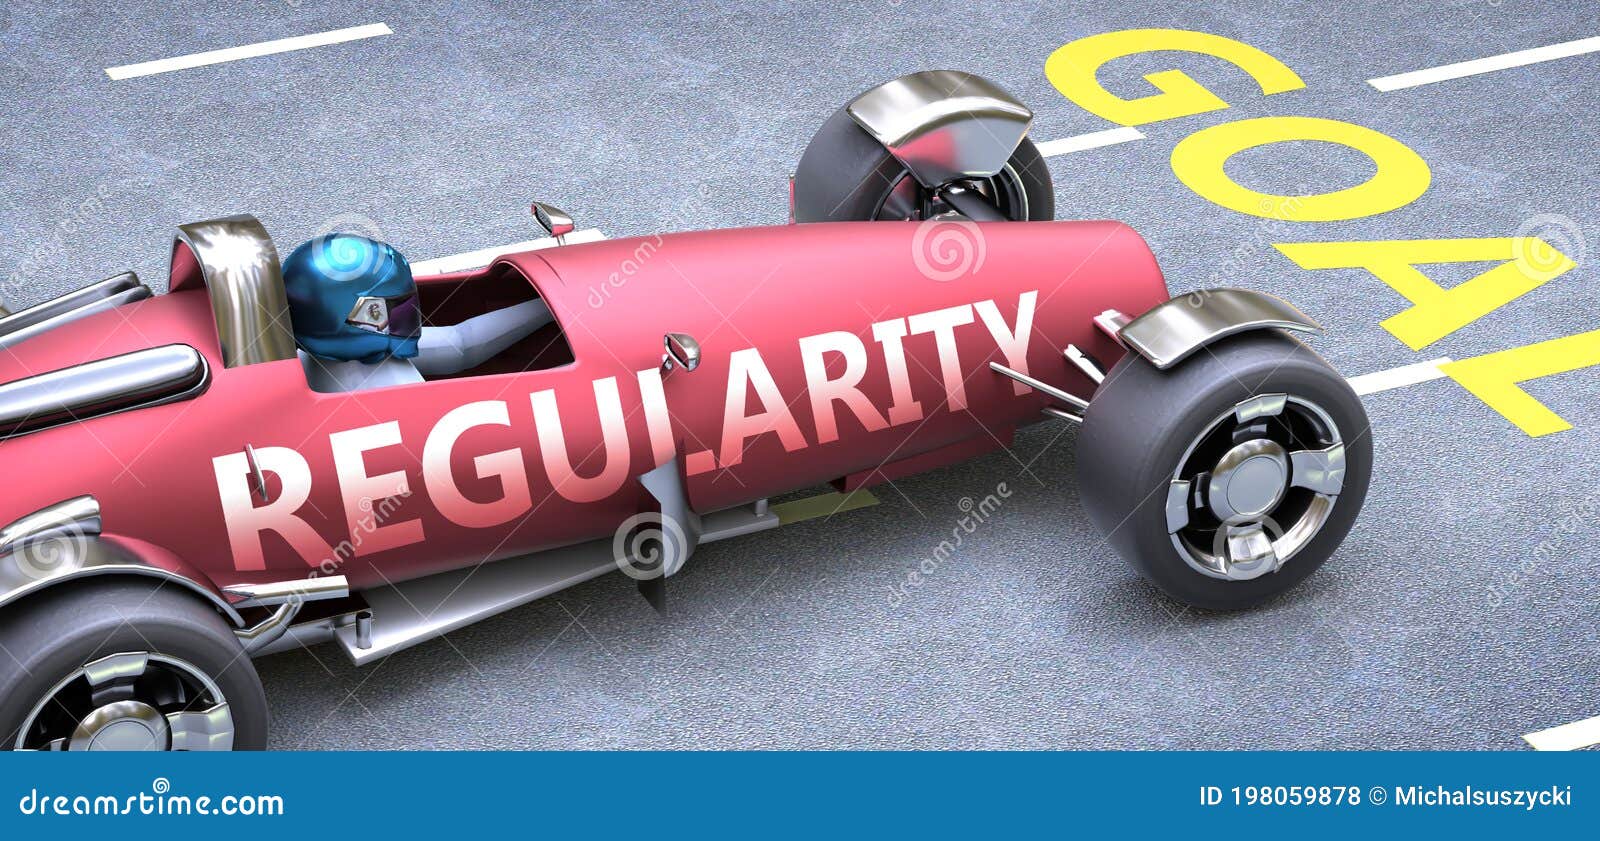 regularity helps reaching goals, pictured as a race car with a phrase regularity on a track as a metaphor of regularity playing